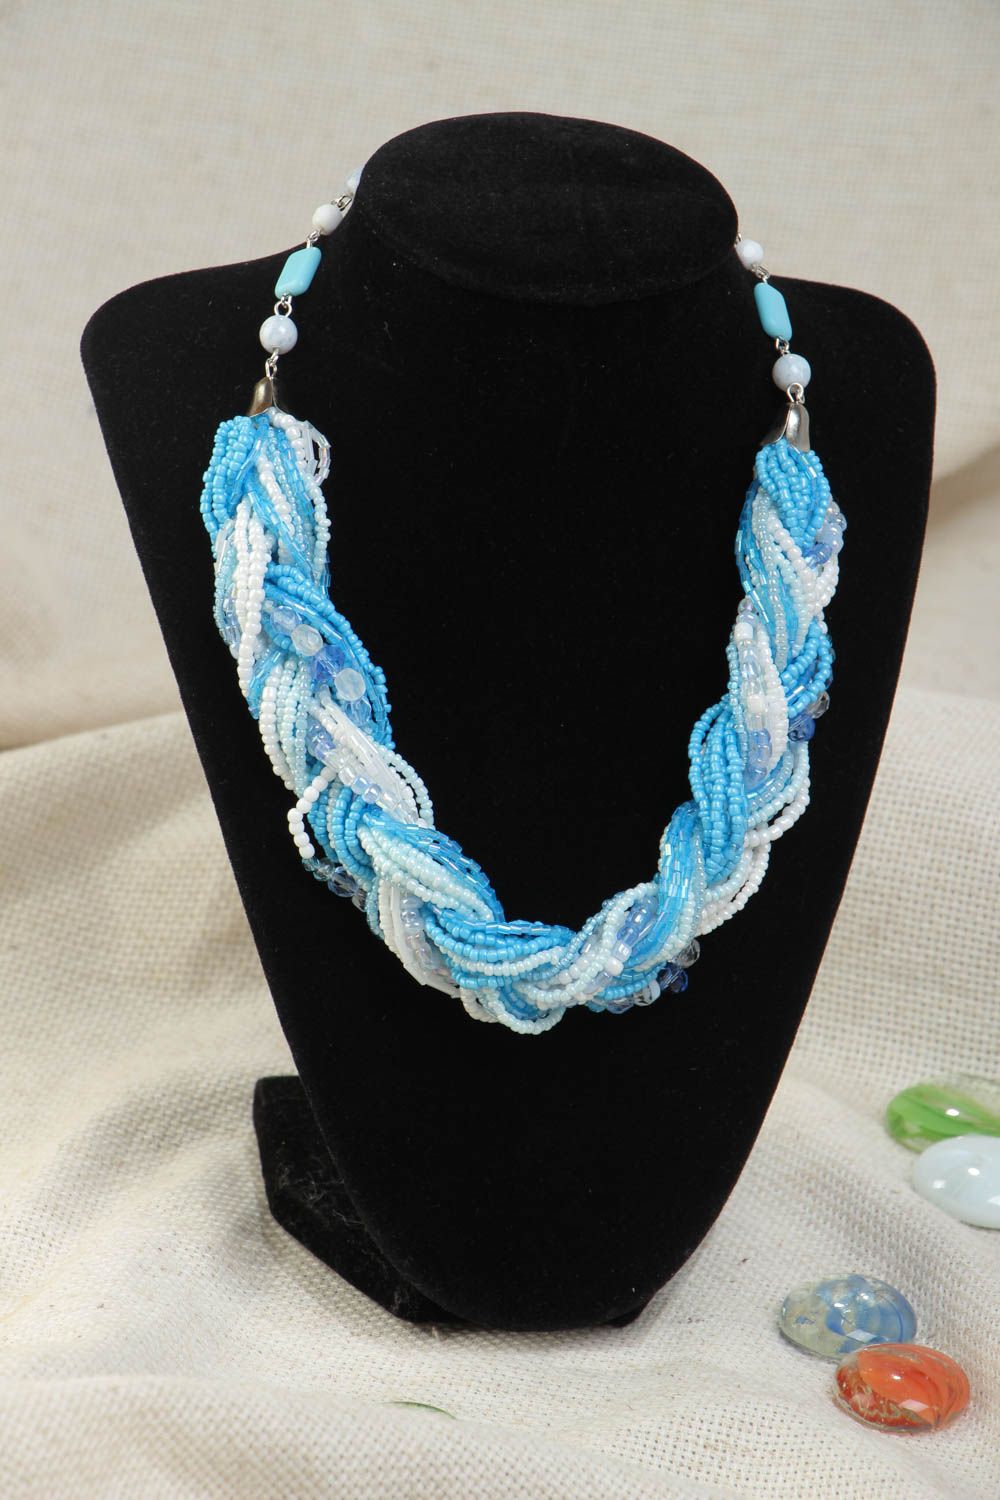 Handmade volume designer necklace woven of blue and white beads for women photo 1